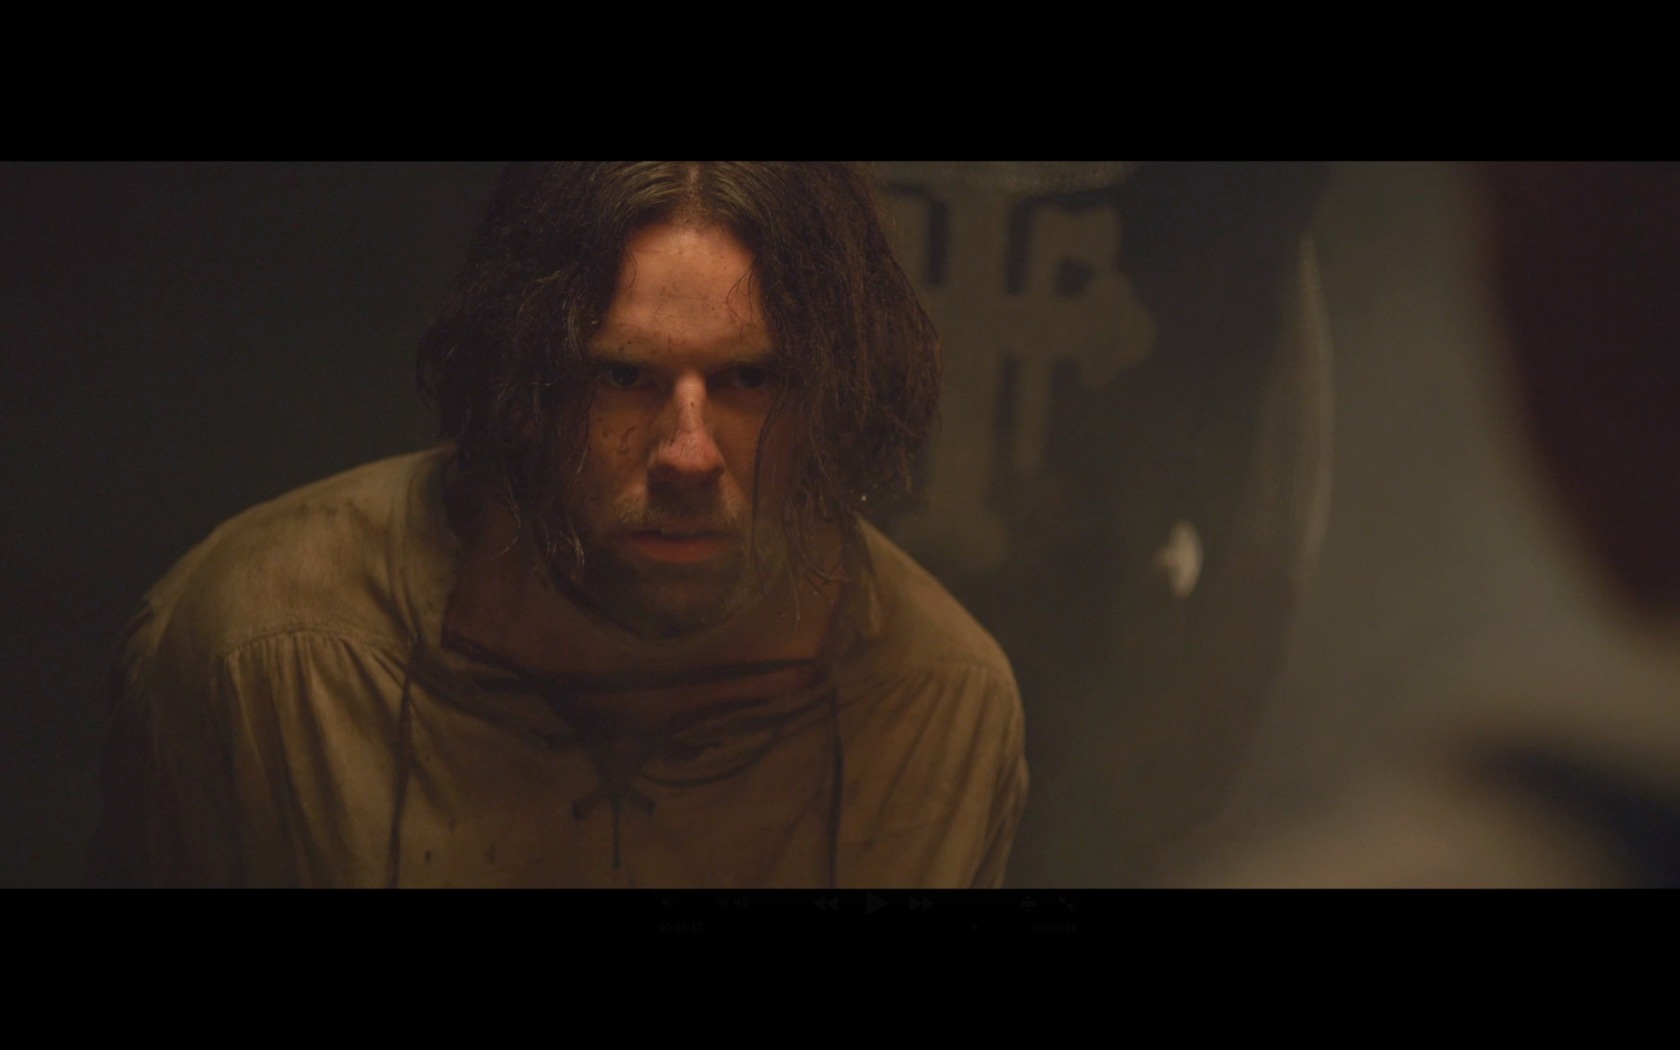 Leif Nygaard as Vilhelm from the film 